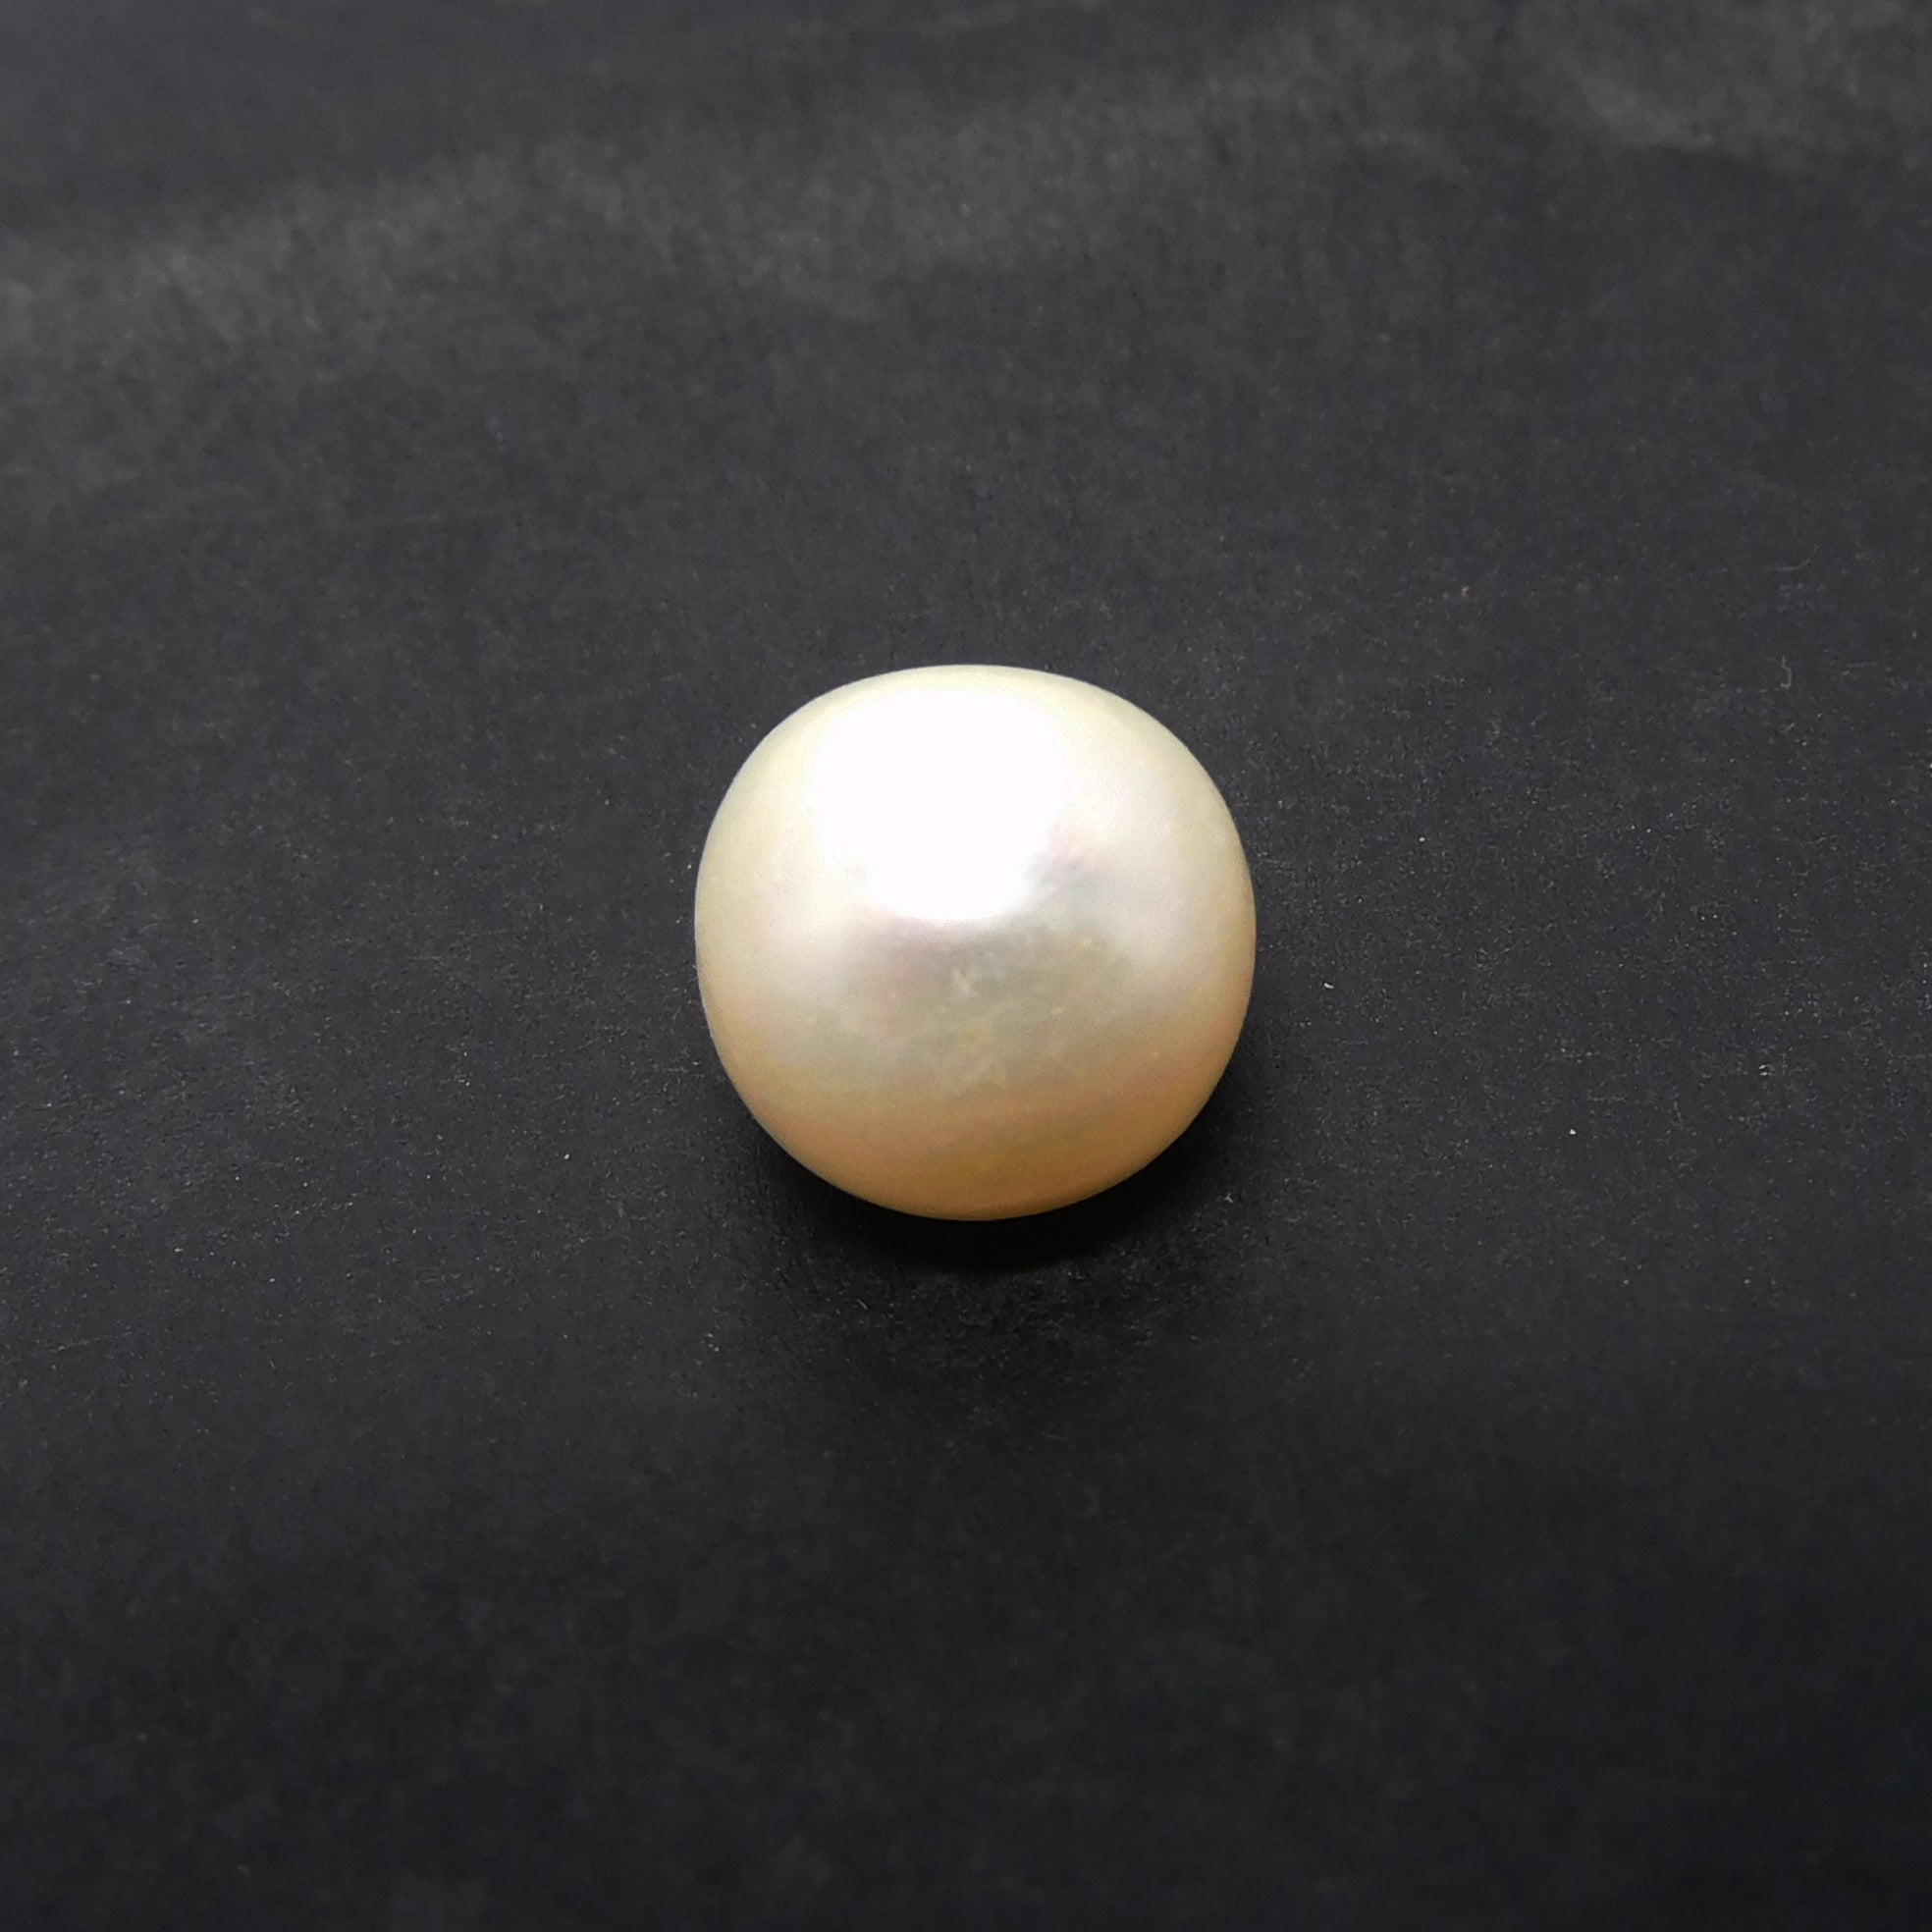 Precious Pearl For Jwelery Making Gem !!! 5.35 Carat Fancy Round Shape Natural Mabe SEA Pearl | Gift For Her / Him | Best Offer